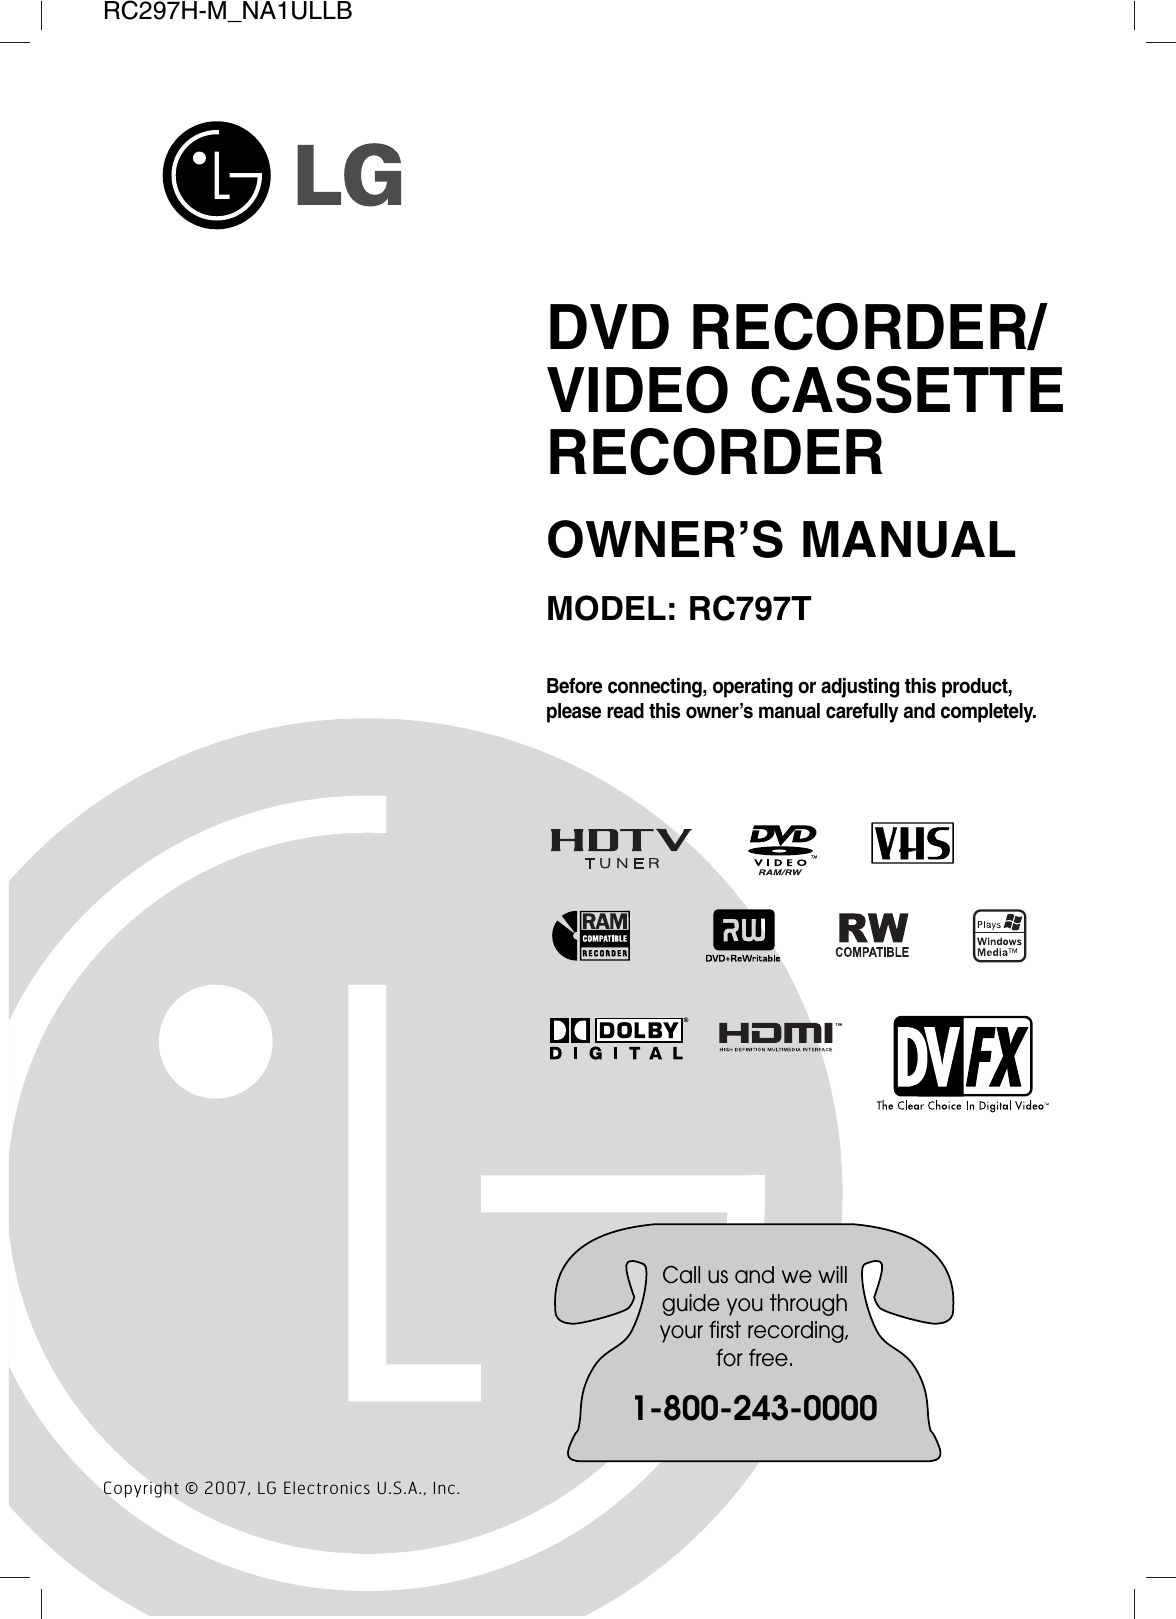 RC297H-M_NA1ULLBBefore connecting, operating or adjusting this product,please read this owner’s manual carefully and completely.DVD RECORDER/VIDEO CASSETTERECORDEROWNER’S MANUALMODEL: RC797TCopyright © 2007, LG Electronics U.S.A., Inc.Call us and we willguide you throughyour first recording,for free.1-800-243-0000